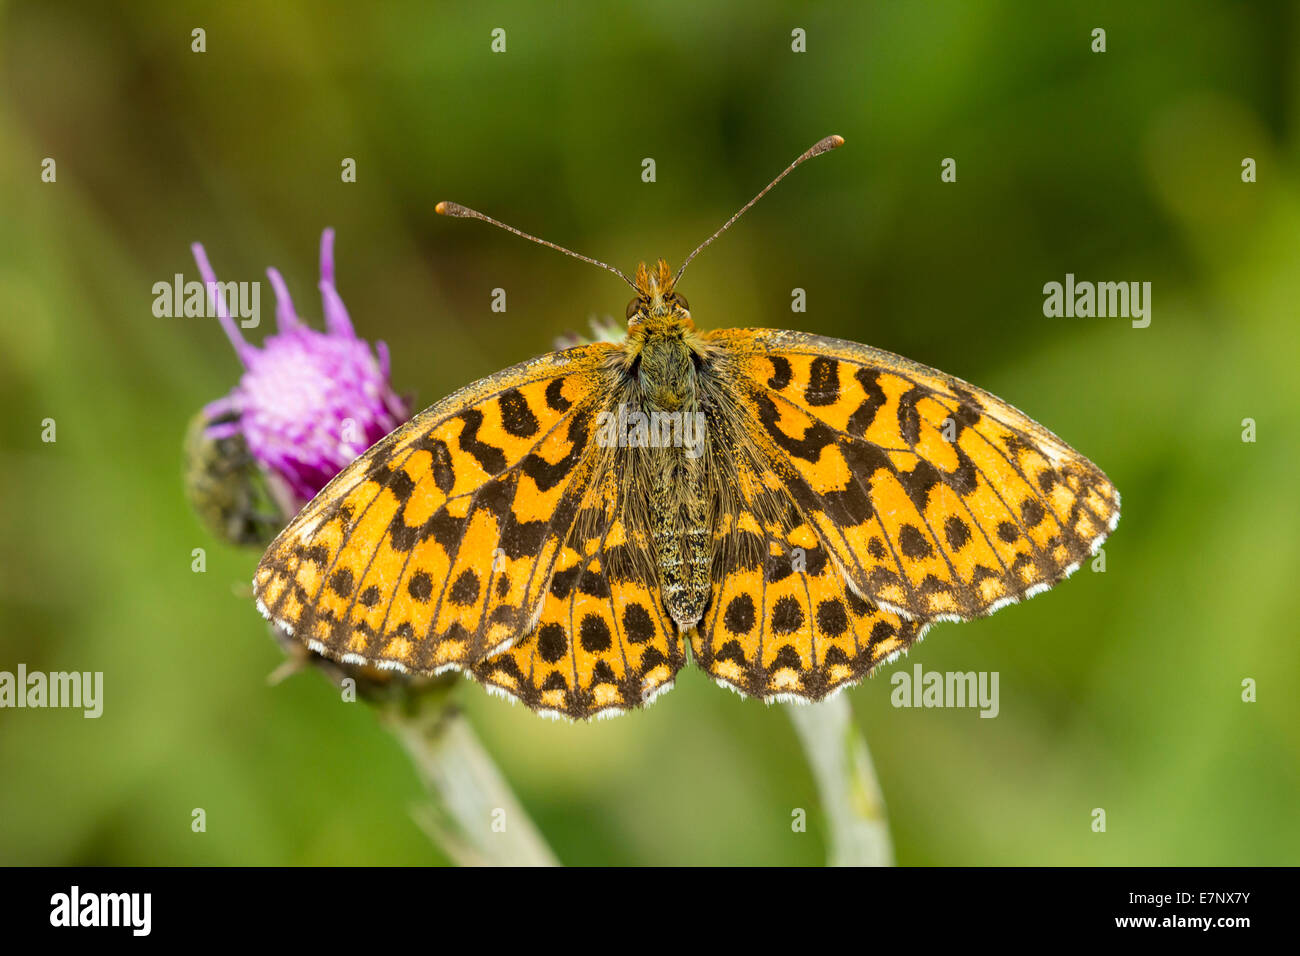 Animal, insecte, Papillon, Lepidoptera, Boloria dia, Weaver's Fritillary, Violet Fritillary, Nymphalidae, Suisse Banque D'Images